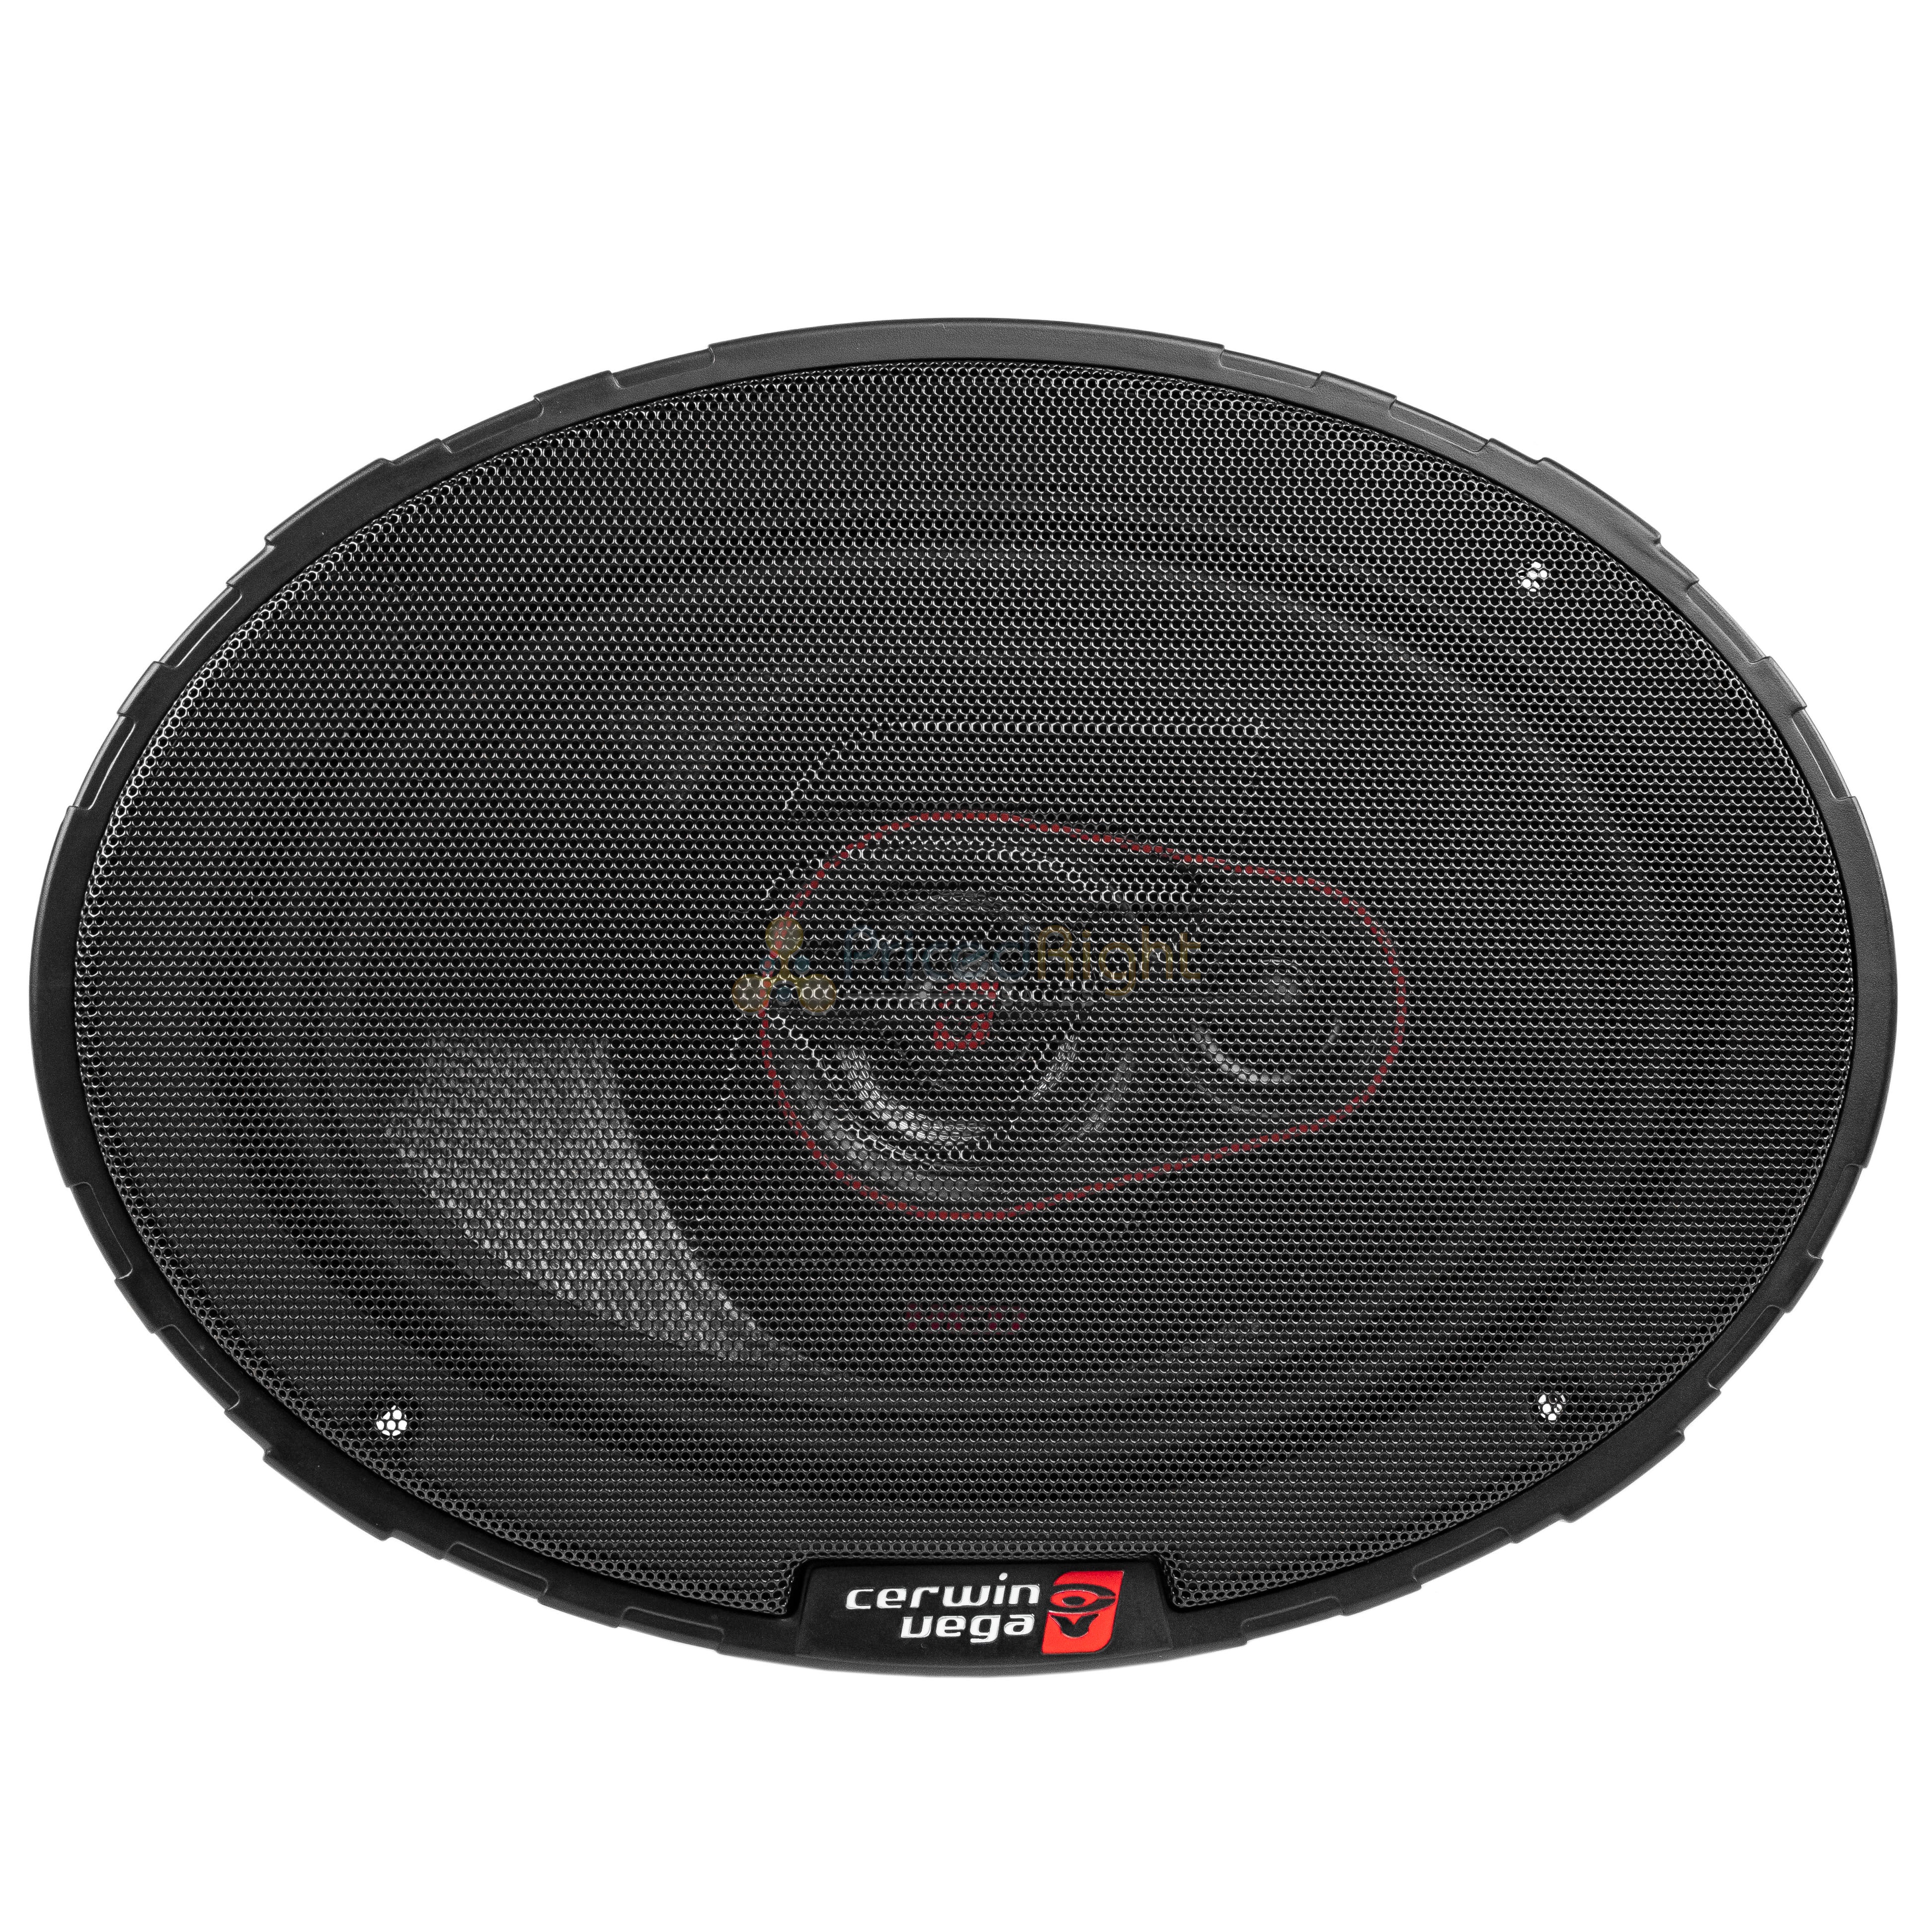 Cerwin Vega H7693 6" x 9" 3 Way Coaxial Car Speakers 4 Ohm 420 Watts Max 4 Pack